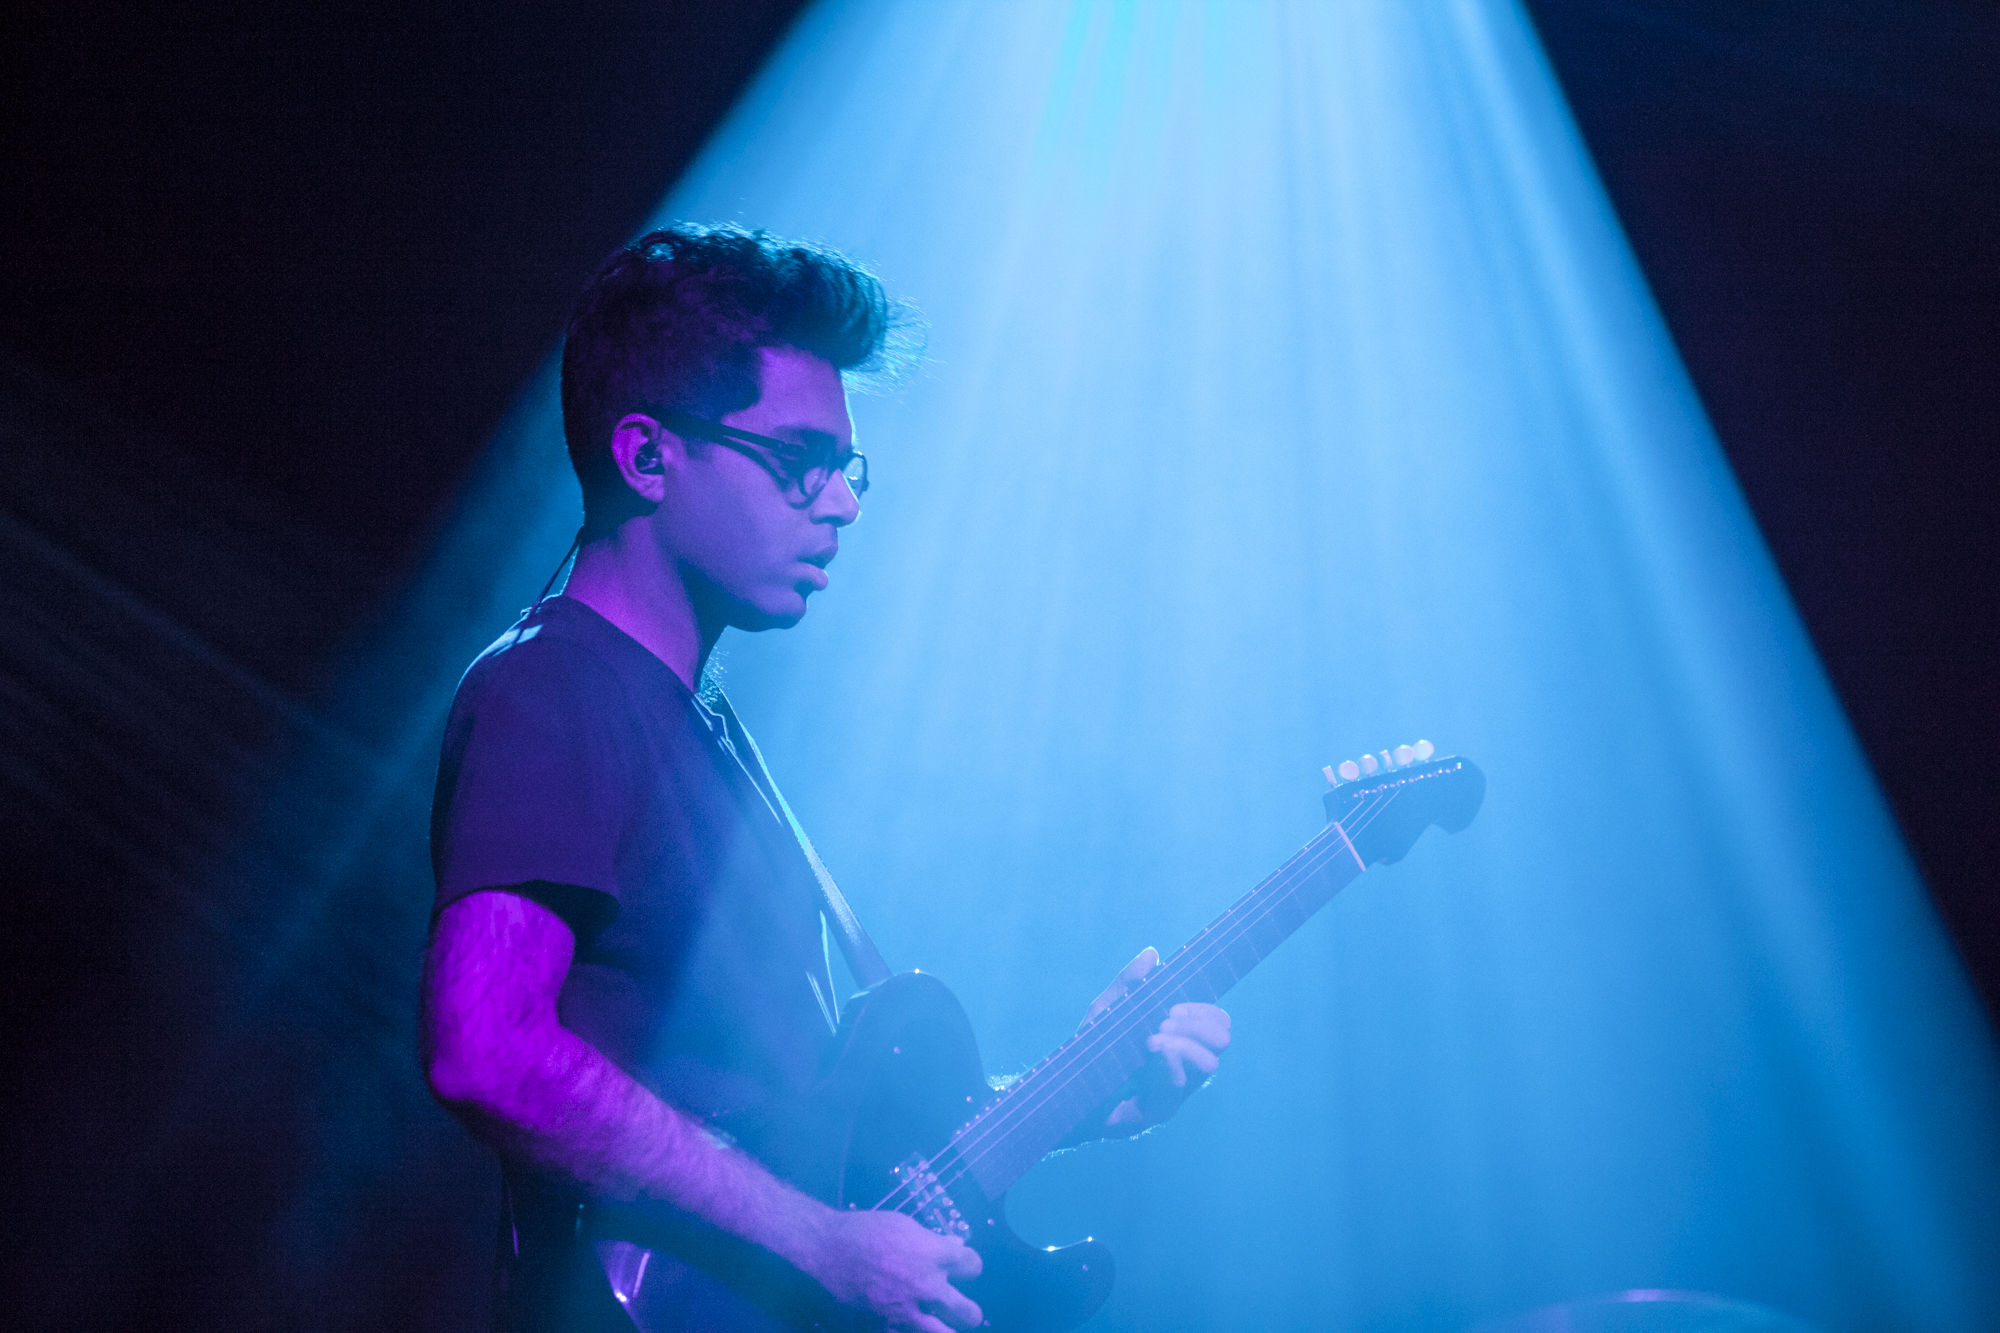 Rafiq Bhatia of Son Lux plays at Brooklyn Steel in Williamsburg, Brooklyn, New York on March 22, 2018. (© Michael Katzif - Do not use or republish without prior consent.)